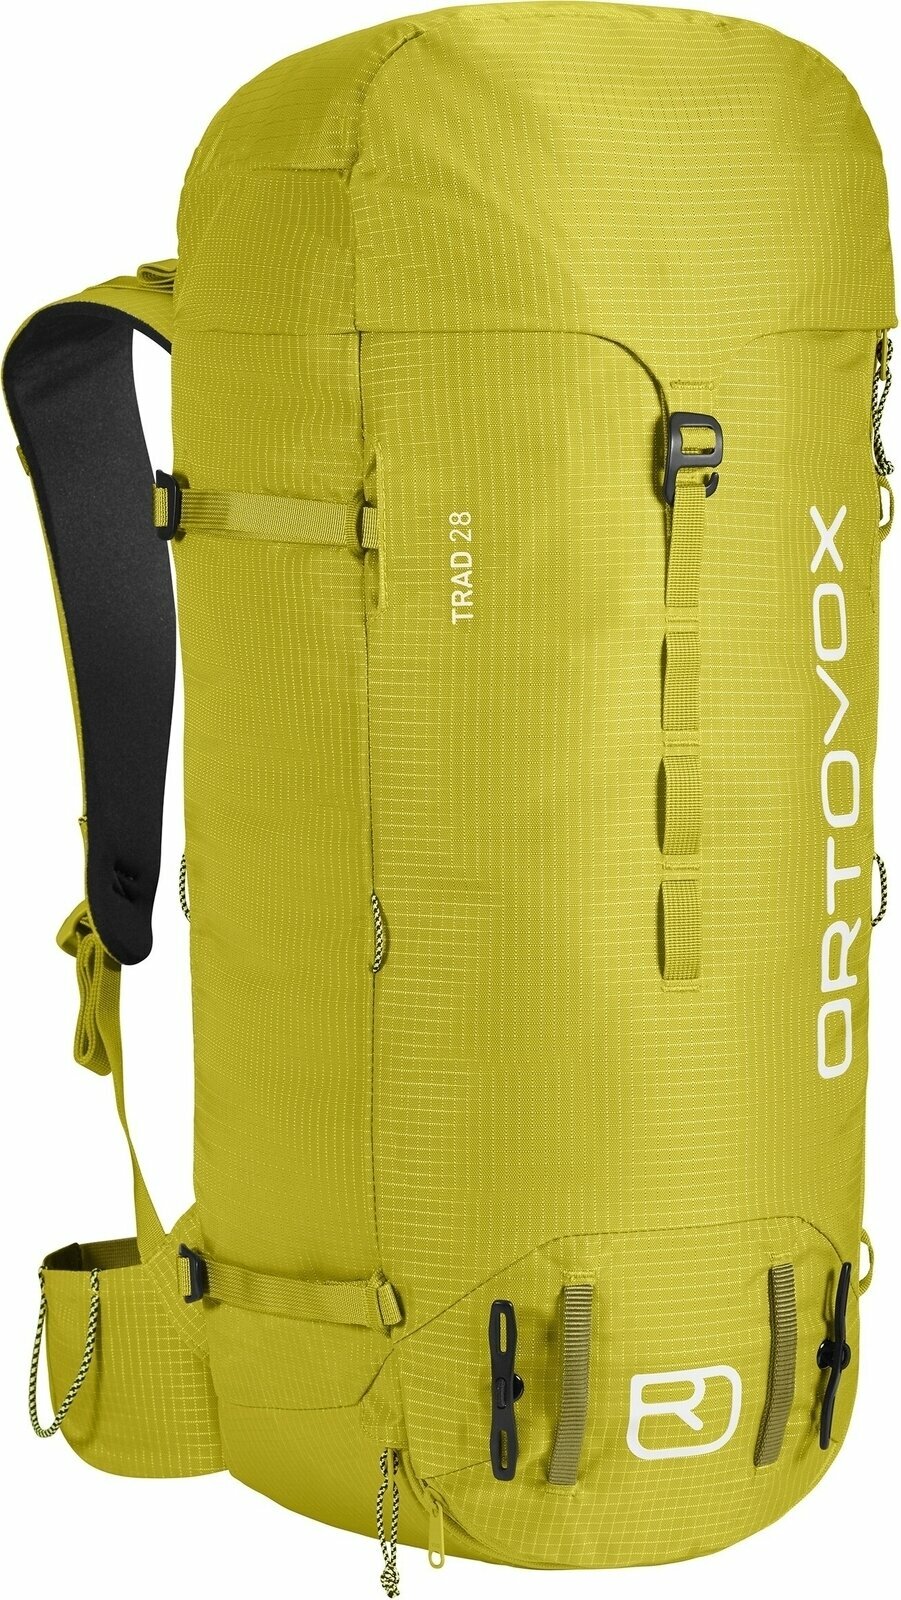 Outdoor Backpack Ortovox Trad 28 Dirty Daisy Outdoor Backpack